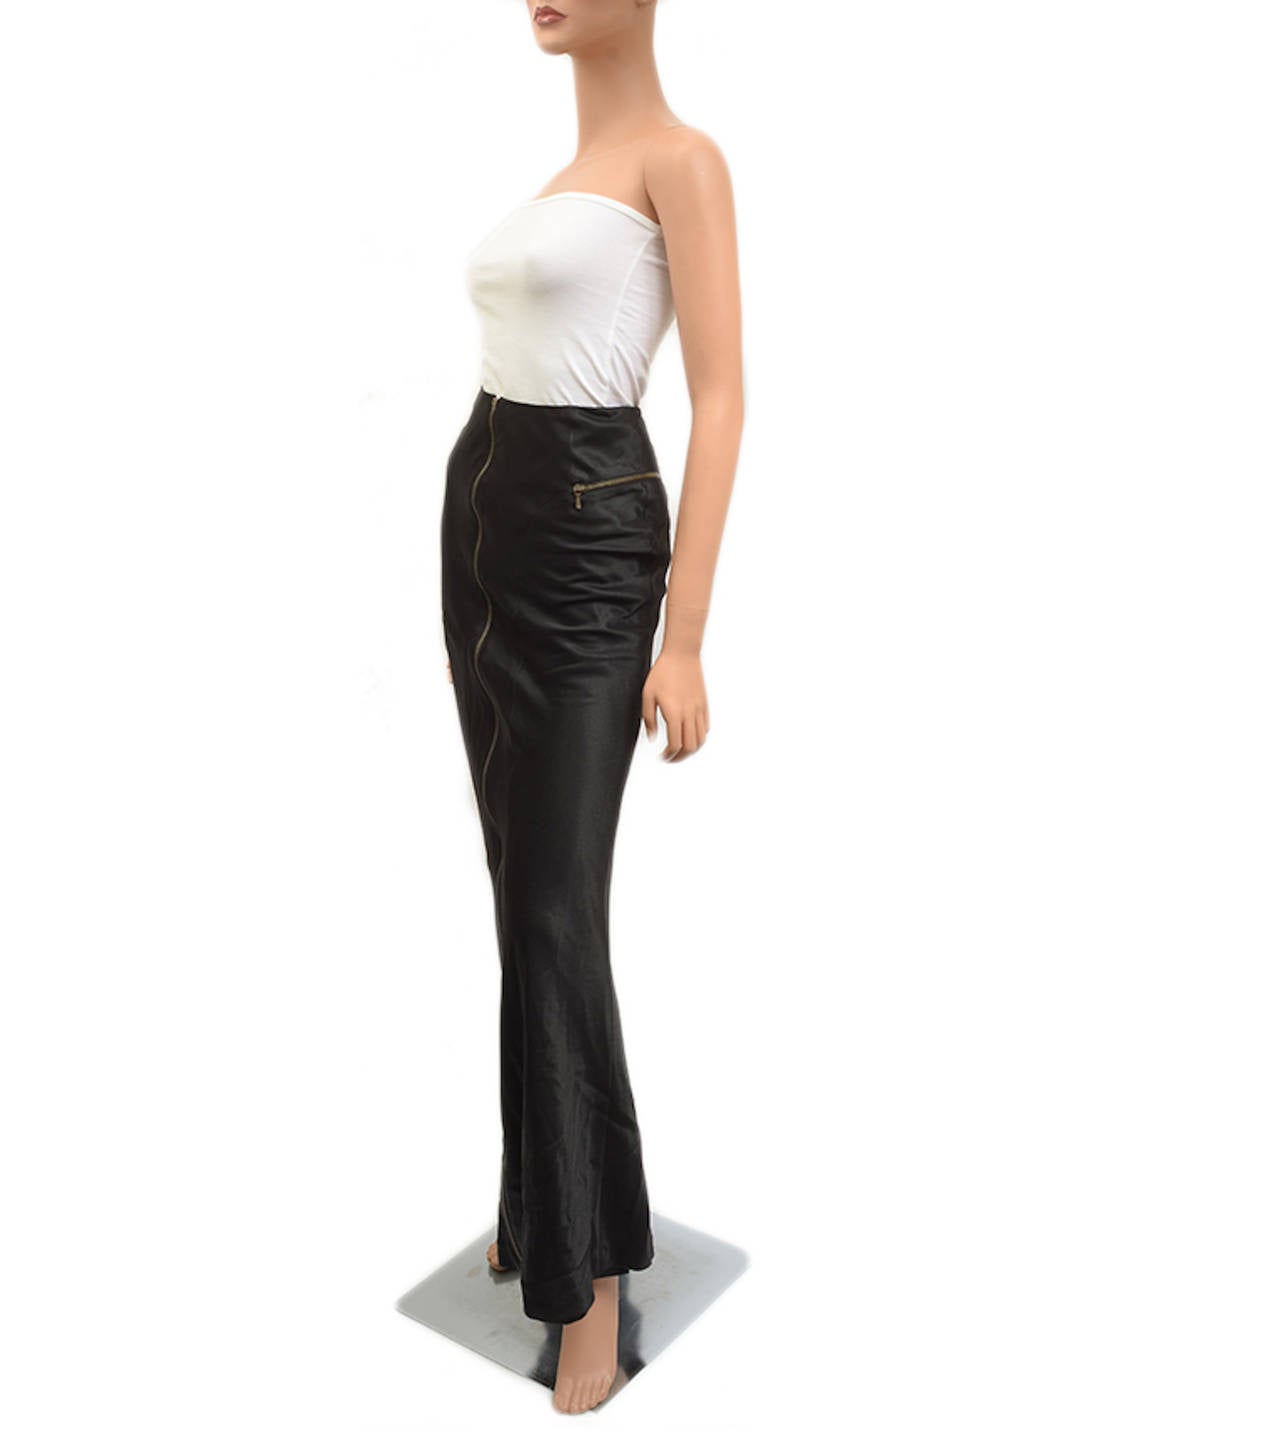 Christian Dior black long black evening skirt with dark gold zipper accents down front and at hips, princess seam details and some flow at bottom. 
 
Fabric:  68% acetate, 32% viscose; lining: 94% silk, 6% elastane
 
Origin: France
 
Retail: 